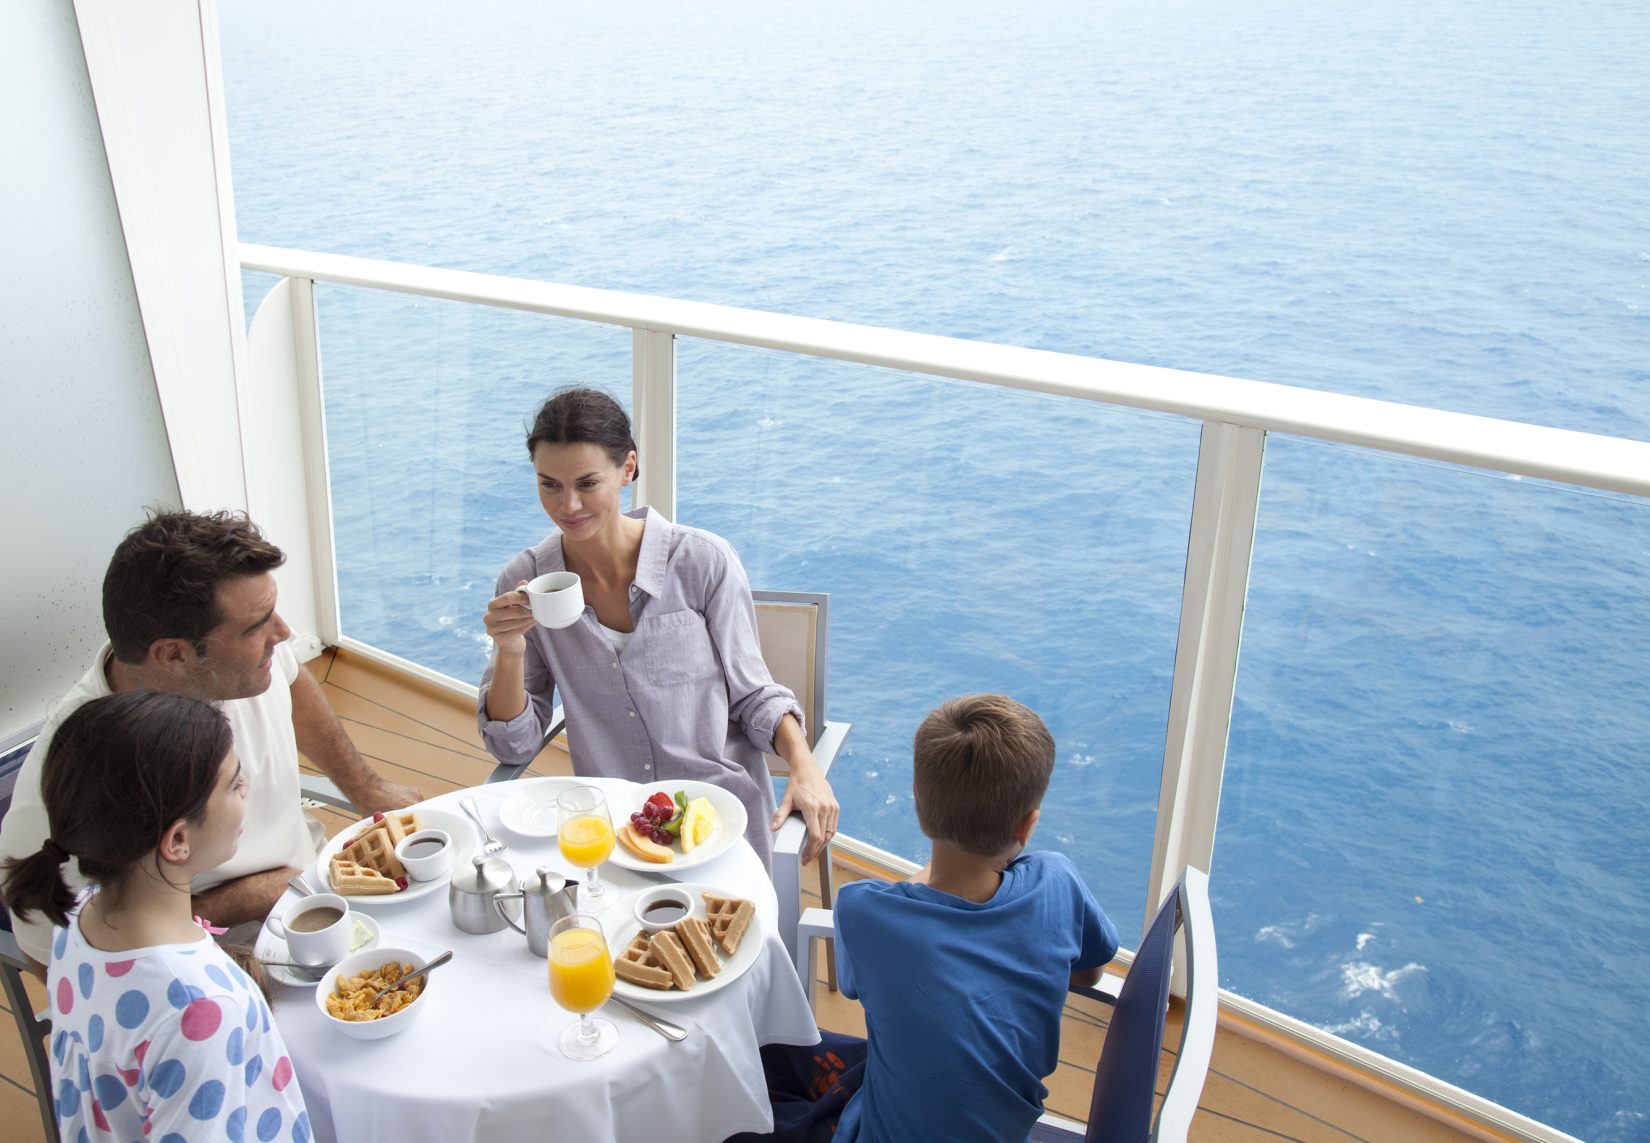 Cruise 101: Why Your Best Bet is a Balcony Stateroom | Royal Caribbean Blog